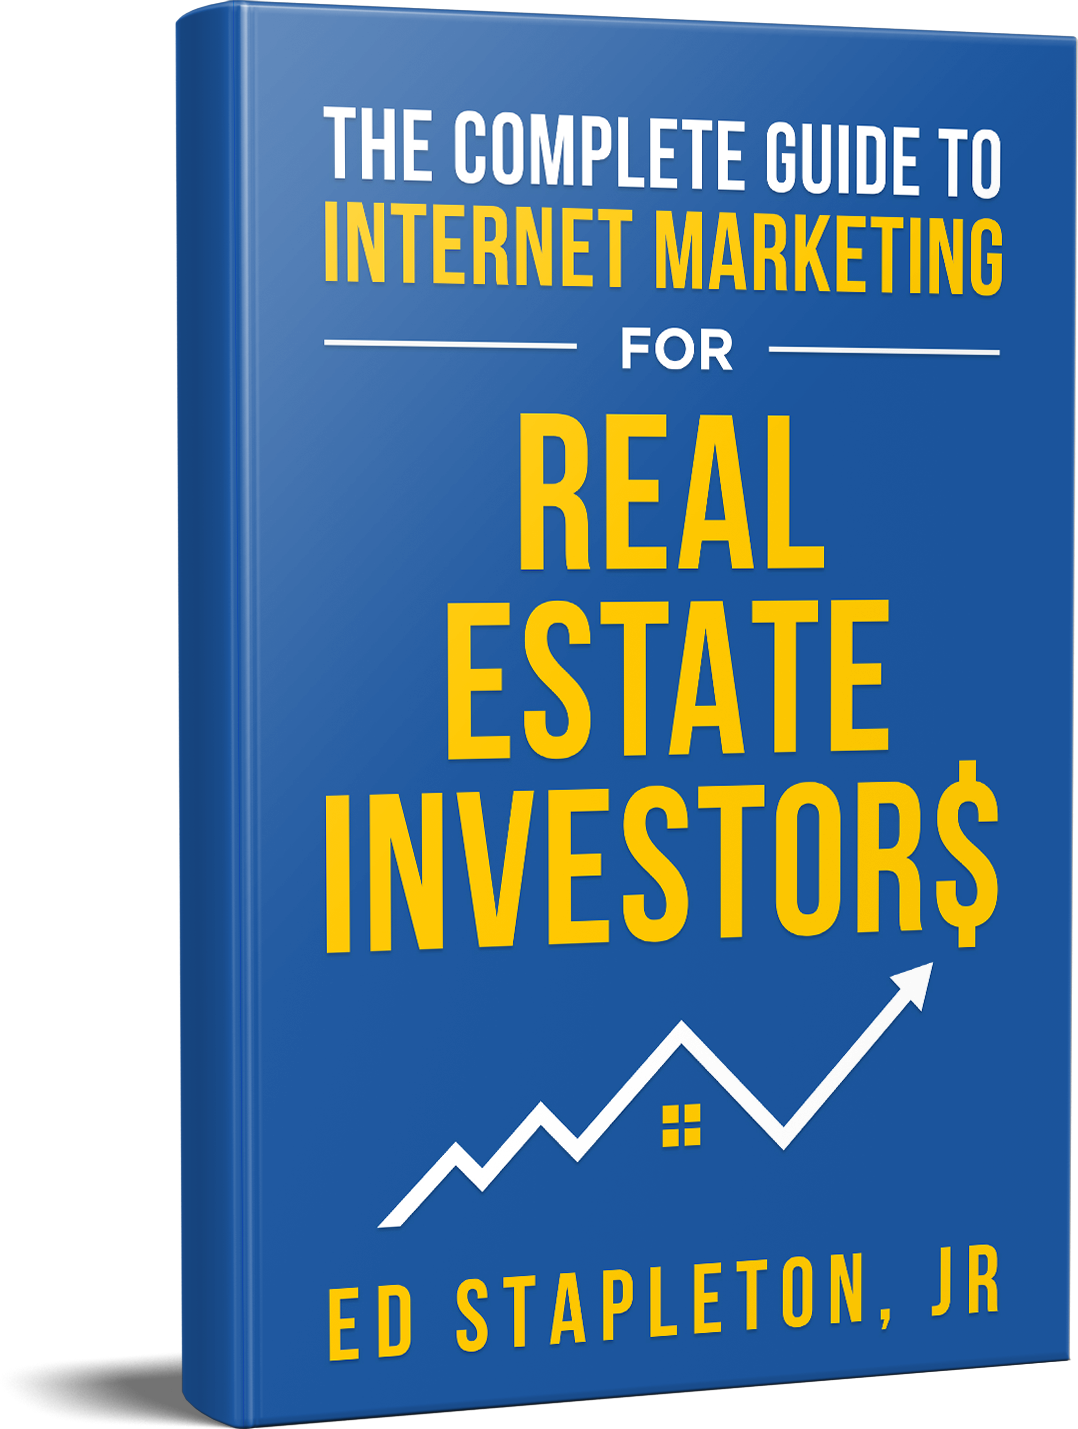 The Complete Guide To Internet Marketing For Real Estate Investors